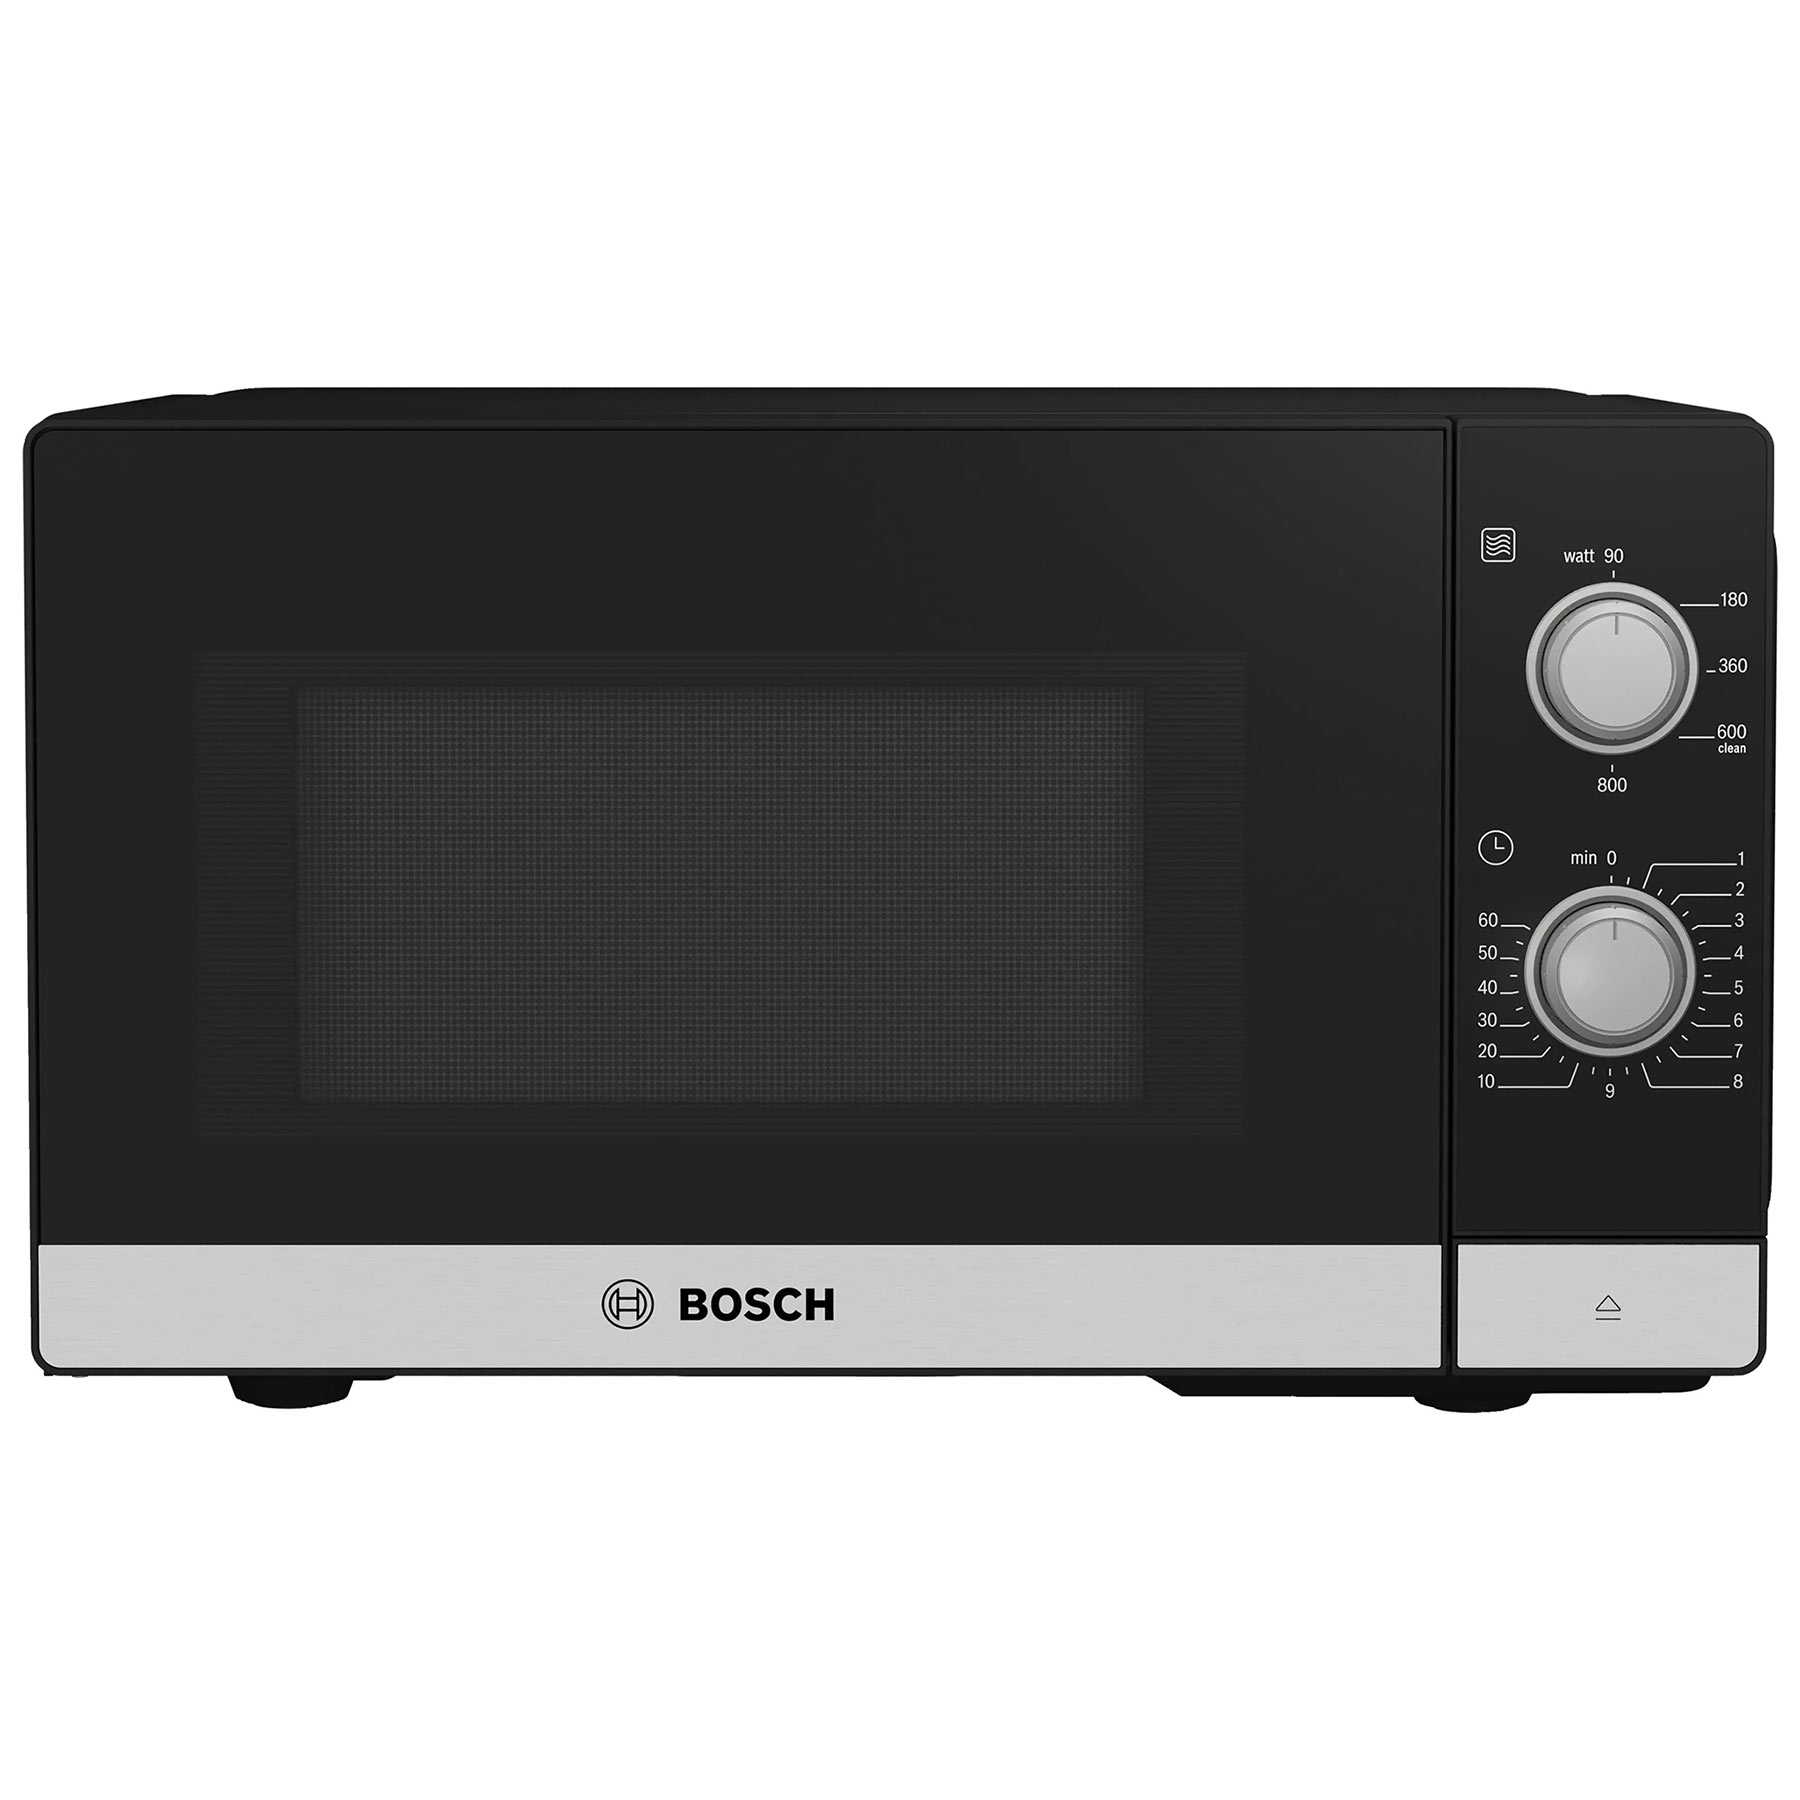 Image of Bosch FFL020MS2B Series 2 Solo Microwave Oven in St Steel 20L 800W